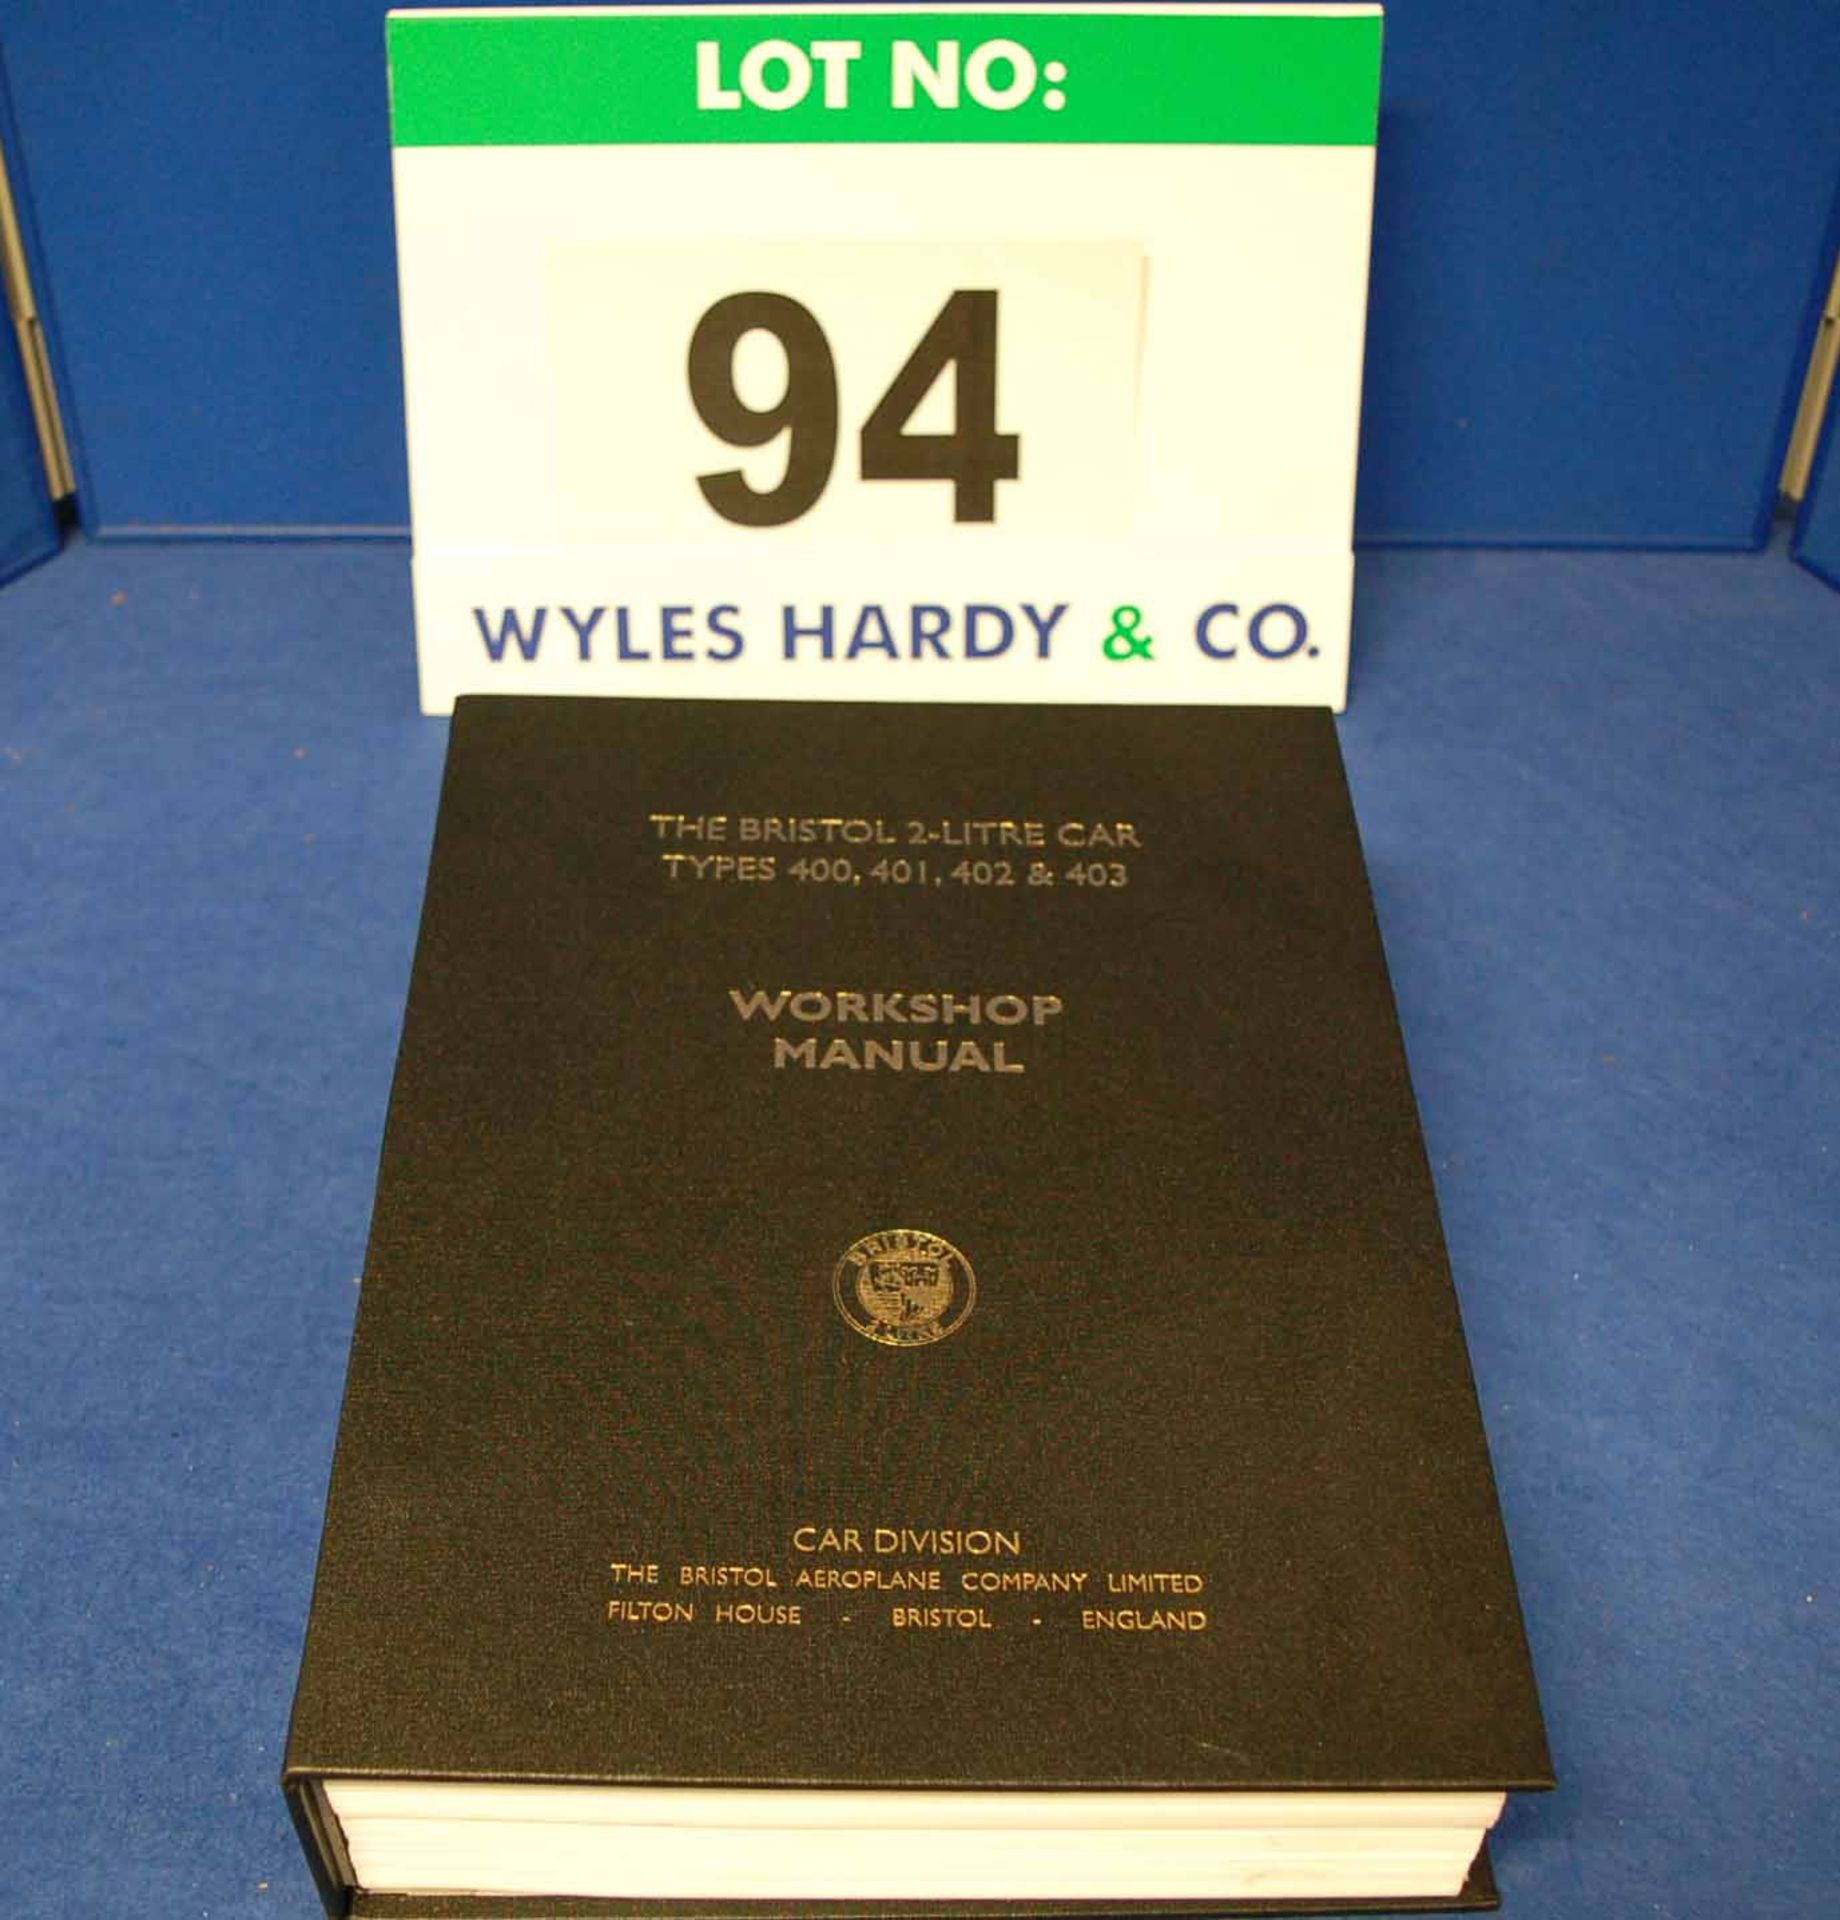 A Copy of The Bristol 2-Litre Car Types 400, 401, 402 and 403 Workshop Manual (New/Unused)